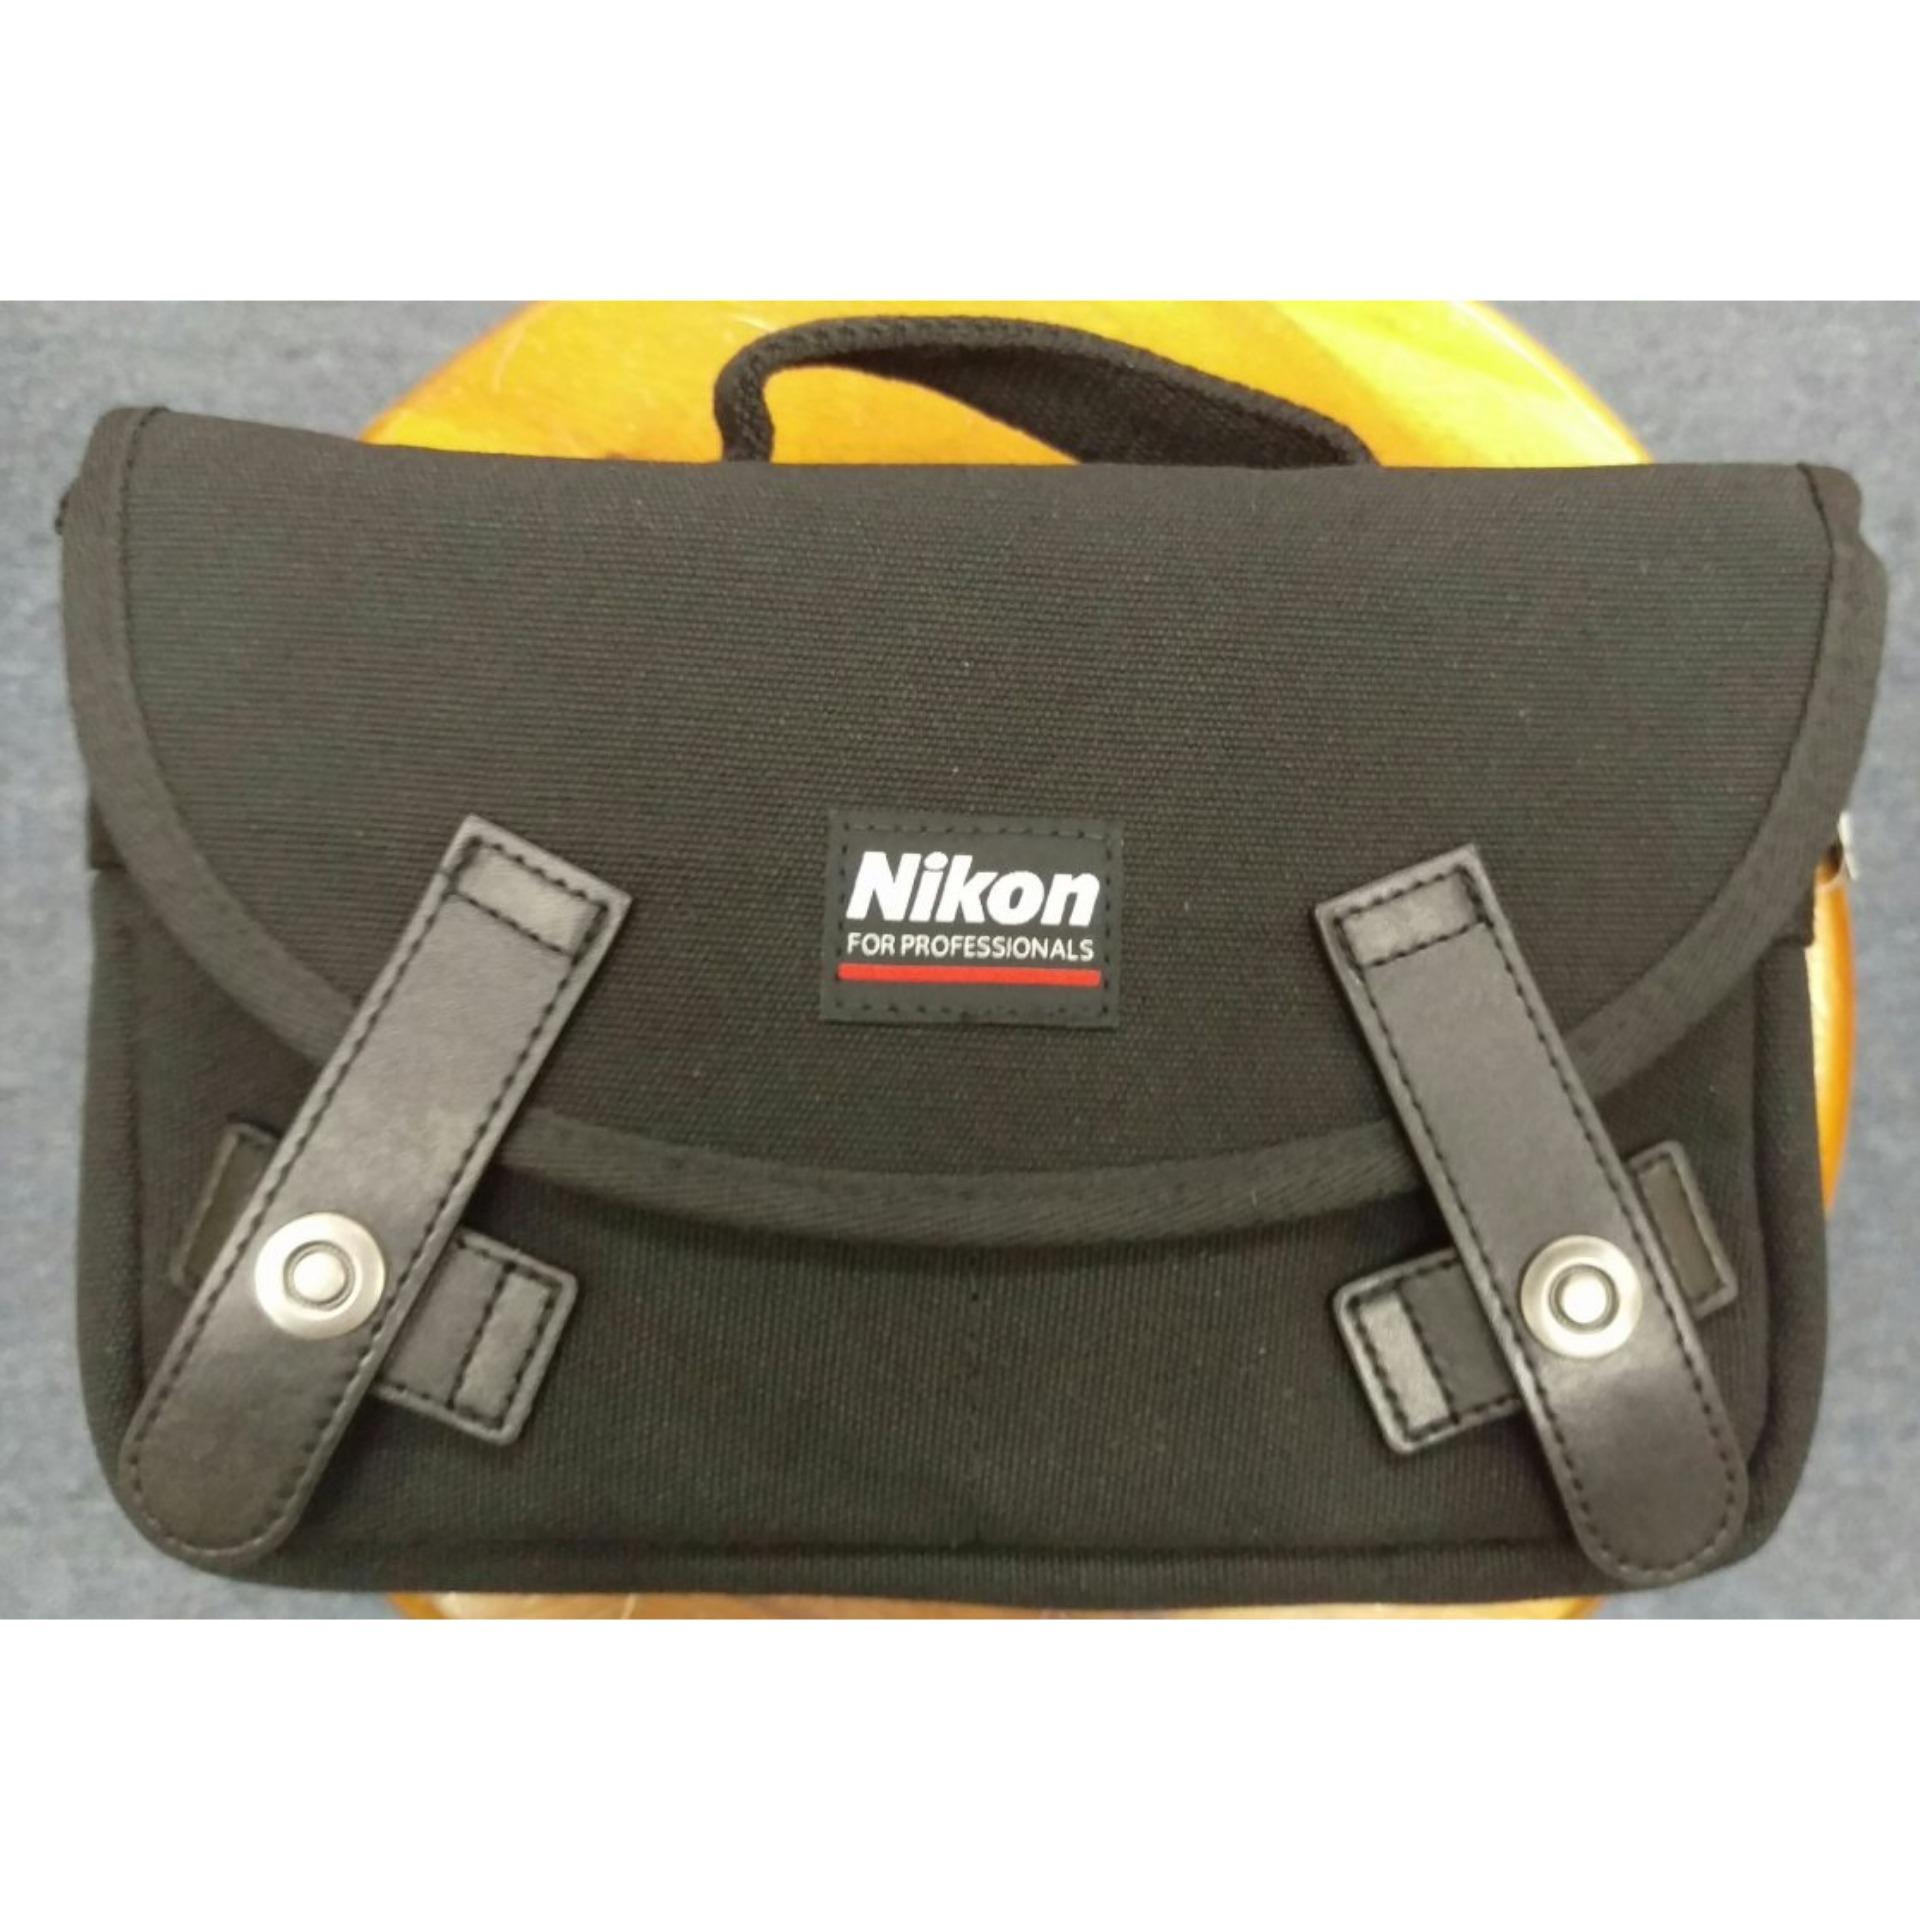 Nikon D3400 DSLR with 18-55mm Lens + Extra Nikon Battery + Nikon Promotion (Please note that price is after Cash...